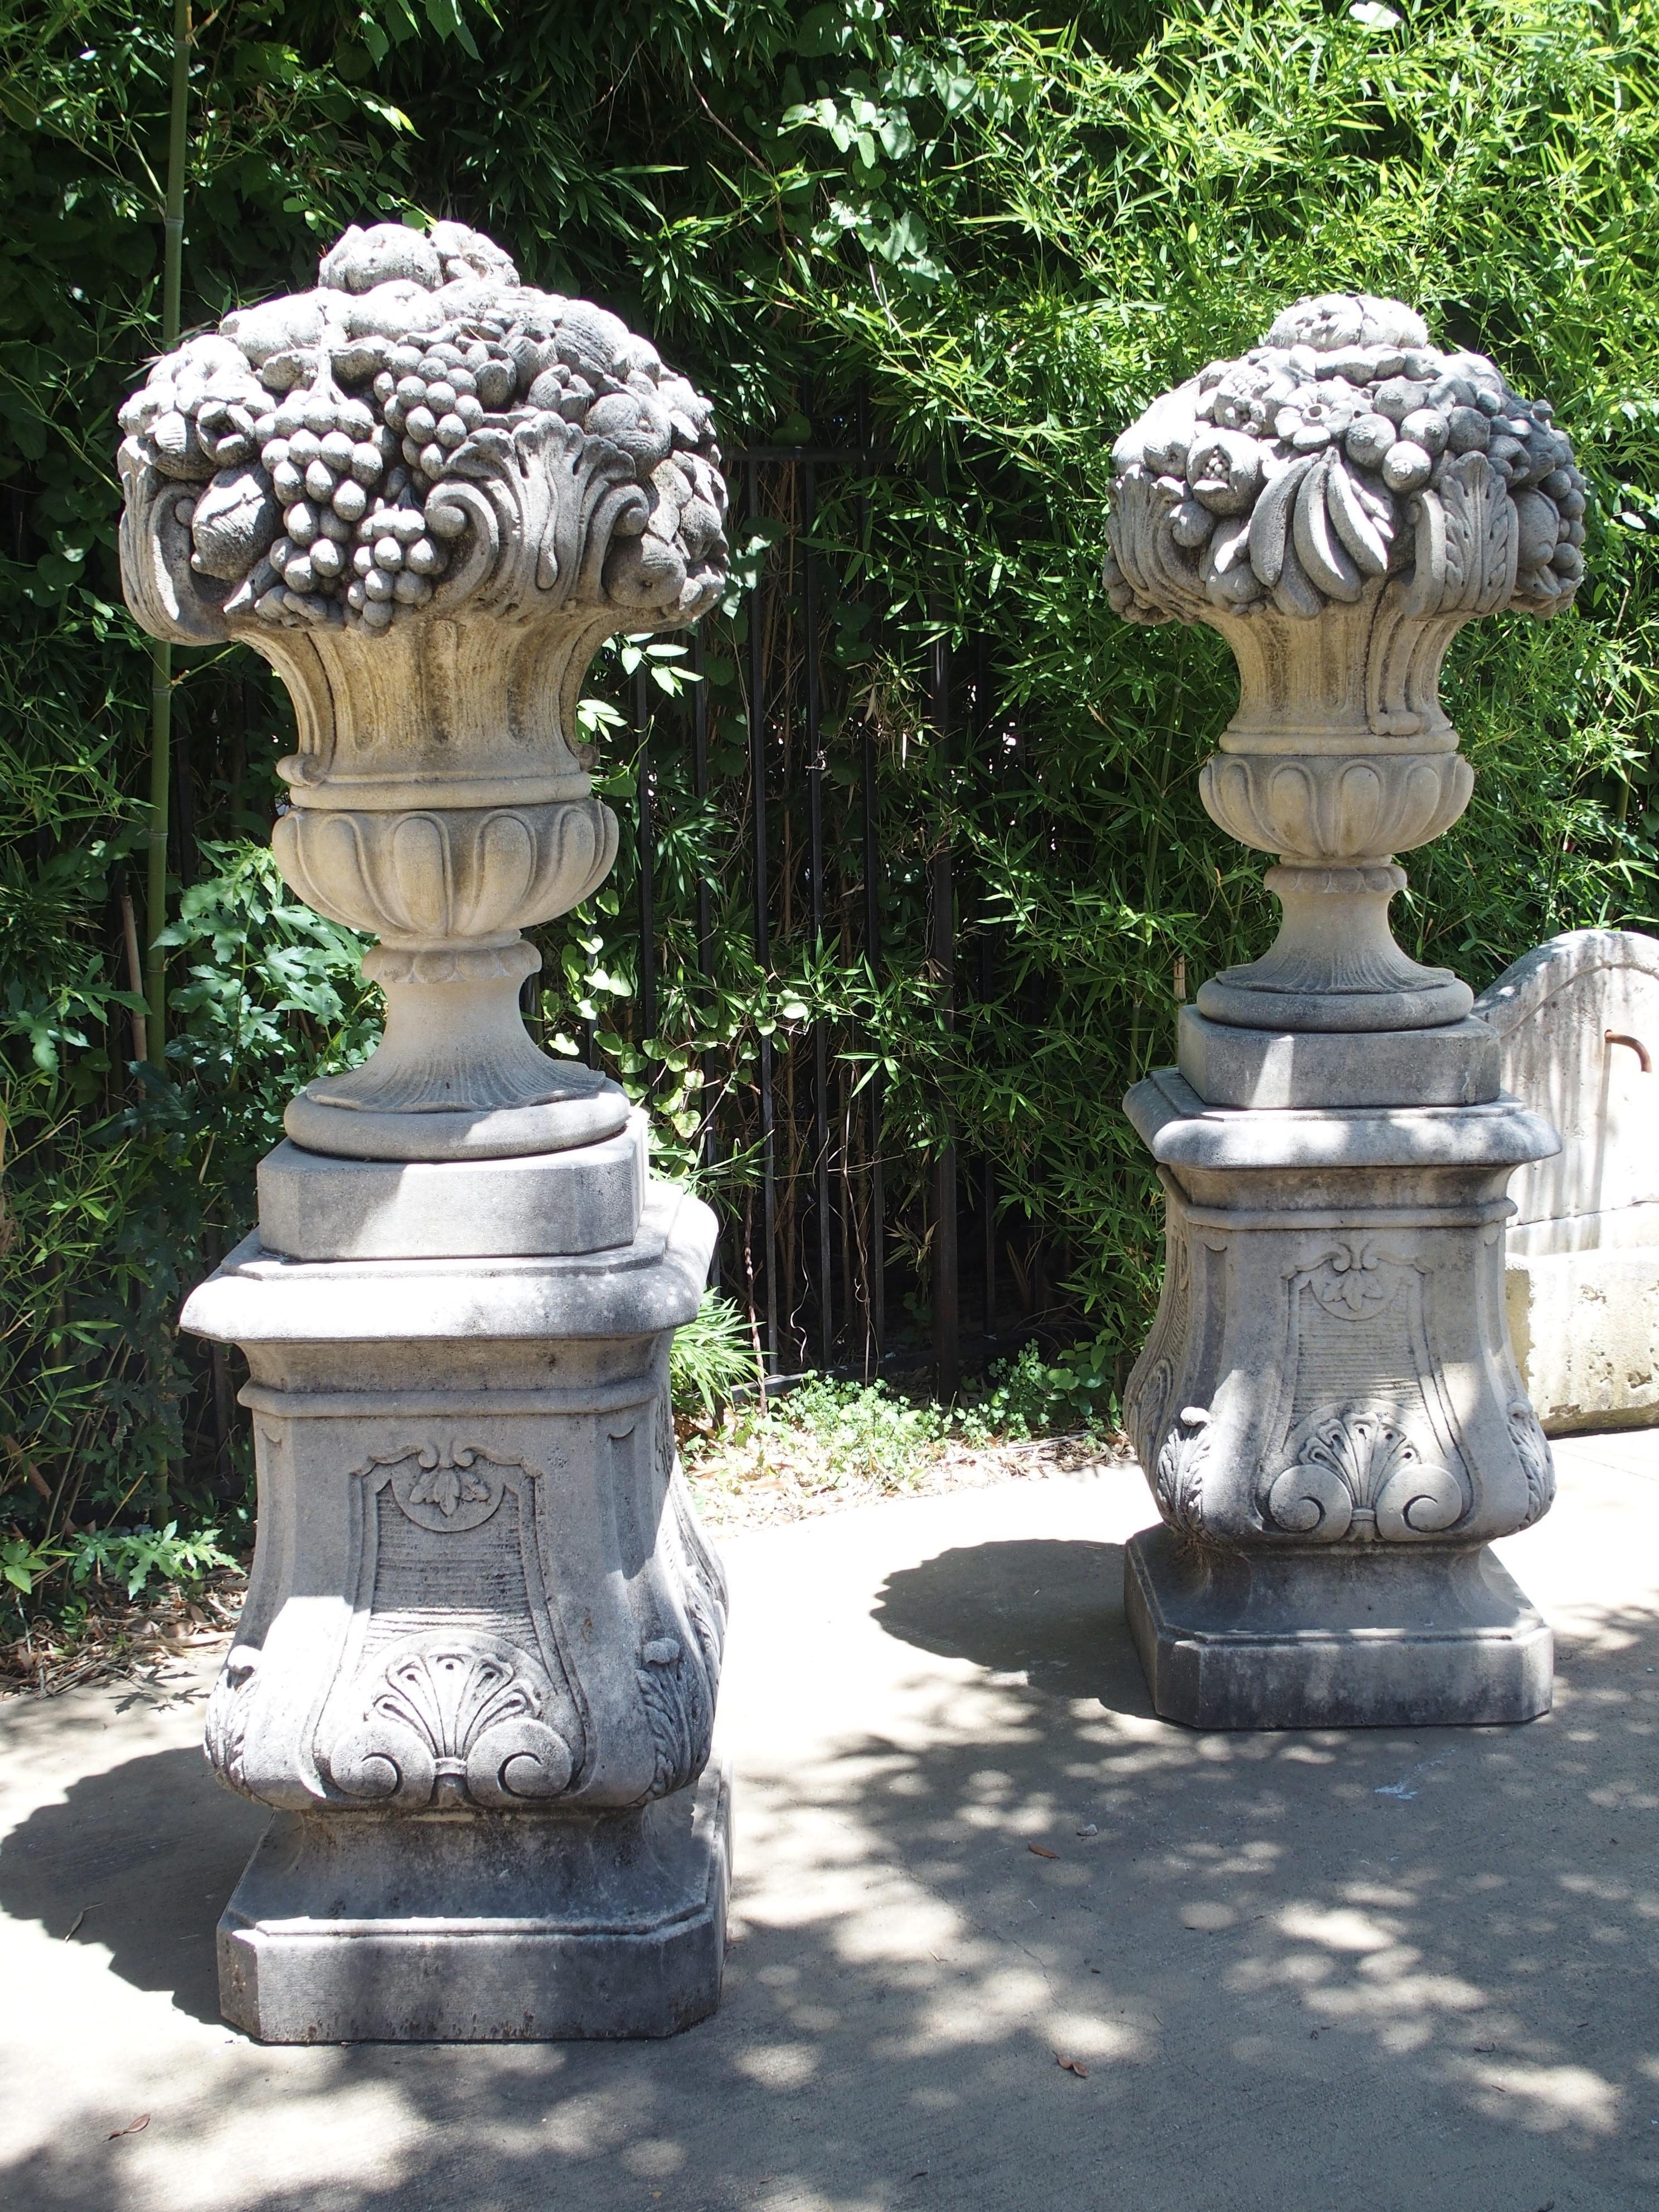 This is a set of large urns overflowing with fruit and flowers, standing upon matching bases. They are completely hand carved from a dense North Italian limestone. They are overflowing with flowers, bananas, grapes, pomegranates, and more. The urns